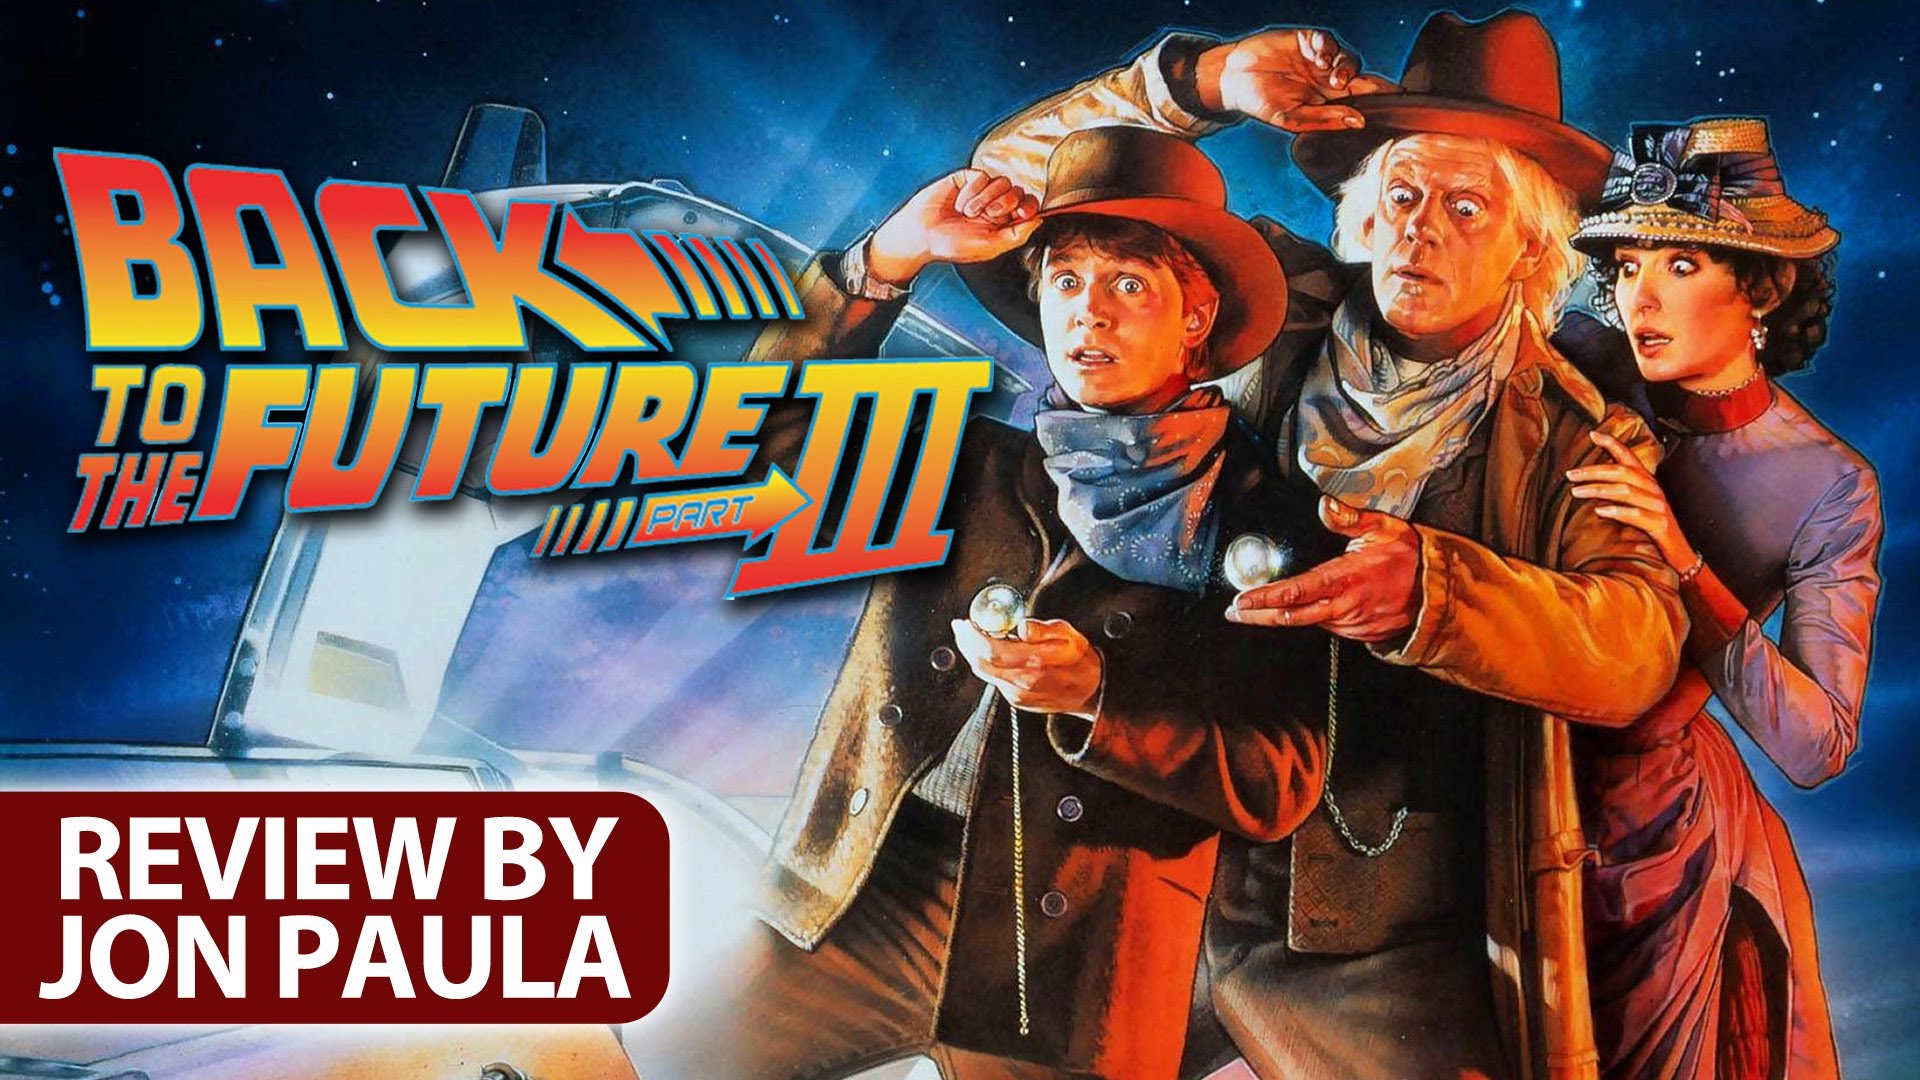 back to the future part iii reviews